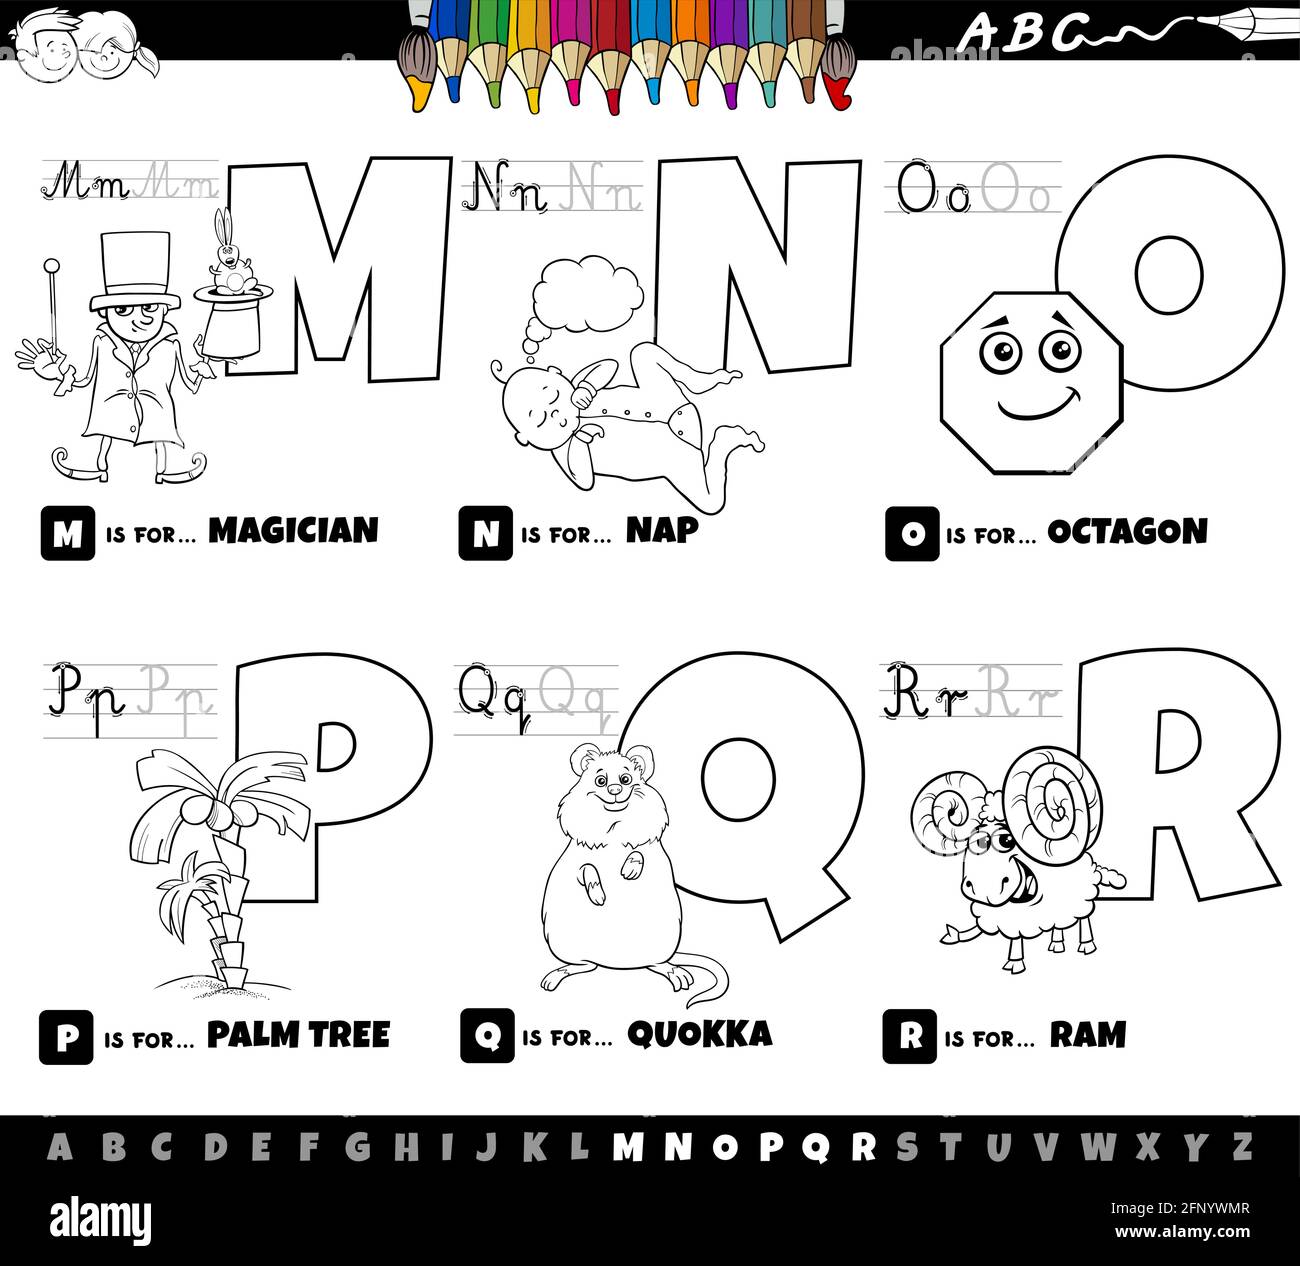 Black and white cartoon illustration of capital letters from alphabet educational set for reading and writing practise for children from M to R colori Stock Vector